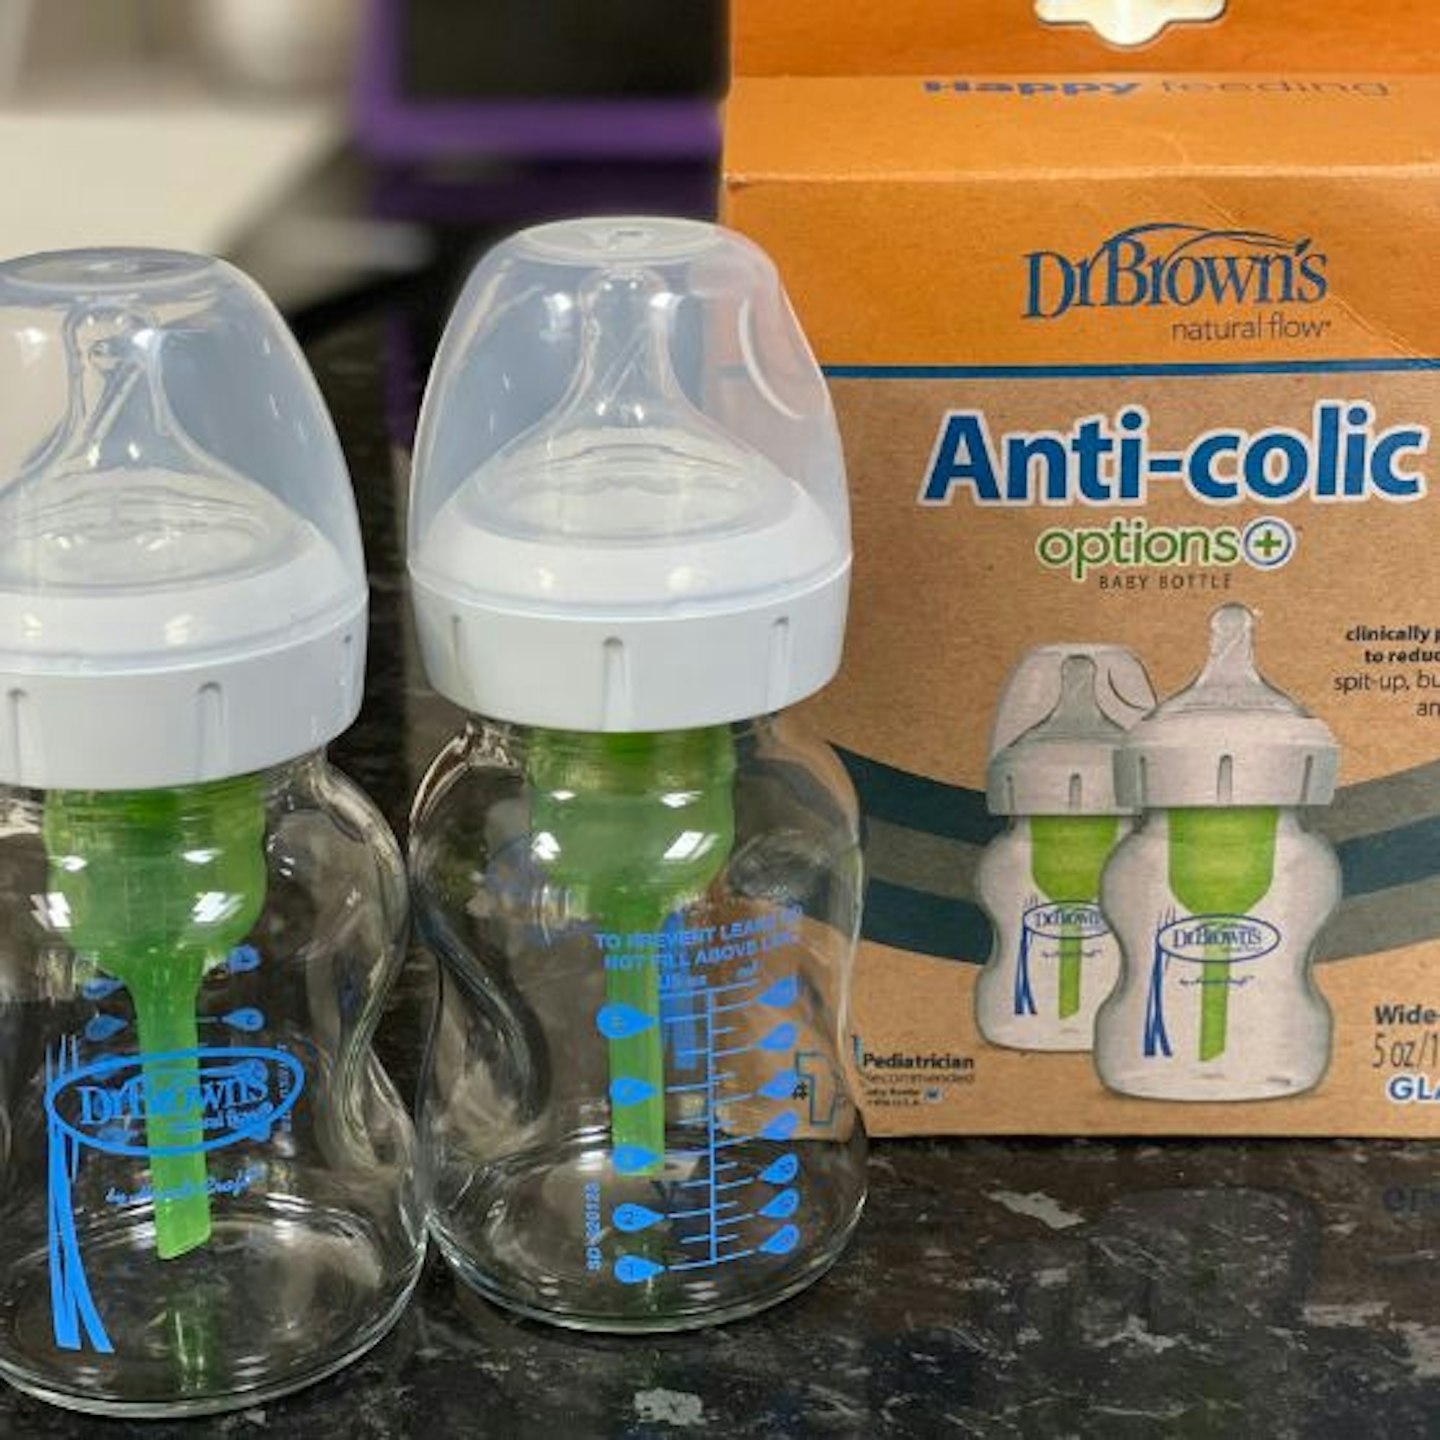 Dr. Brown’s Natural Flow Anti-Colic Options+ Wide-Neck Baby Bottle